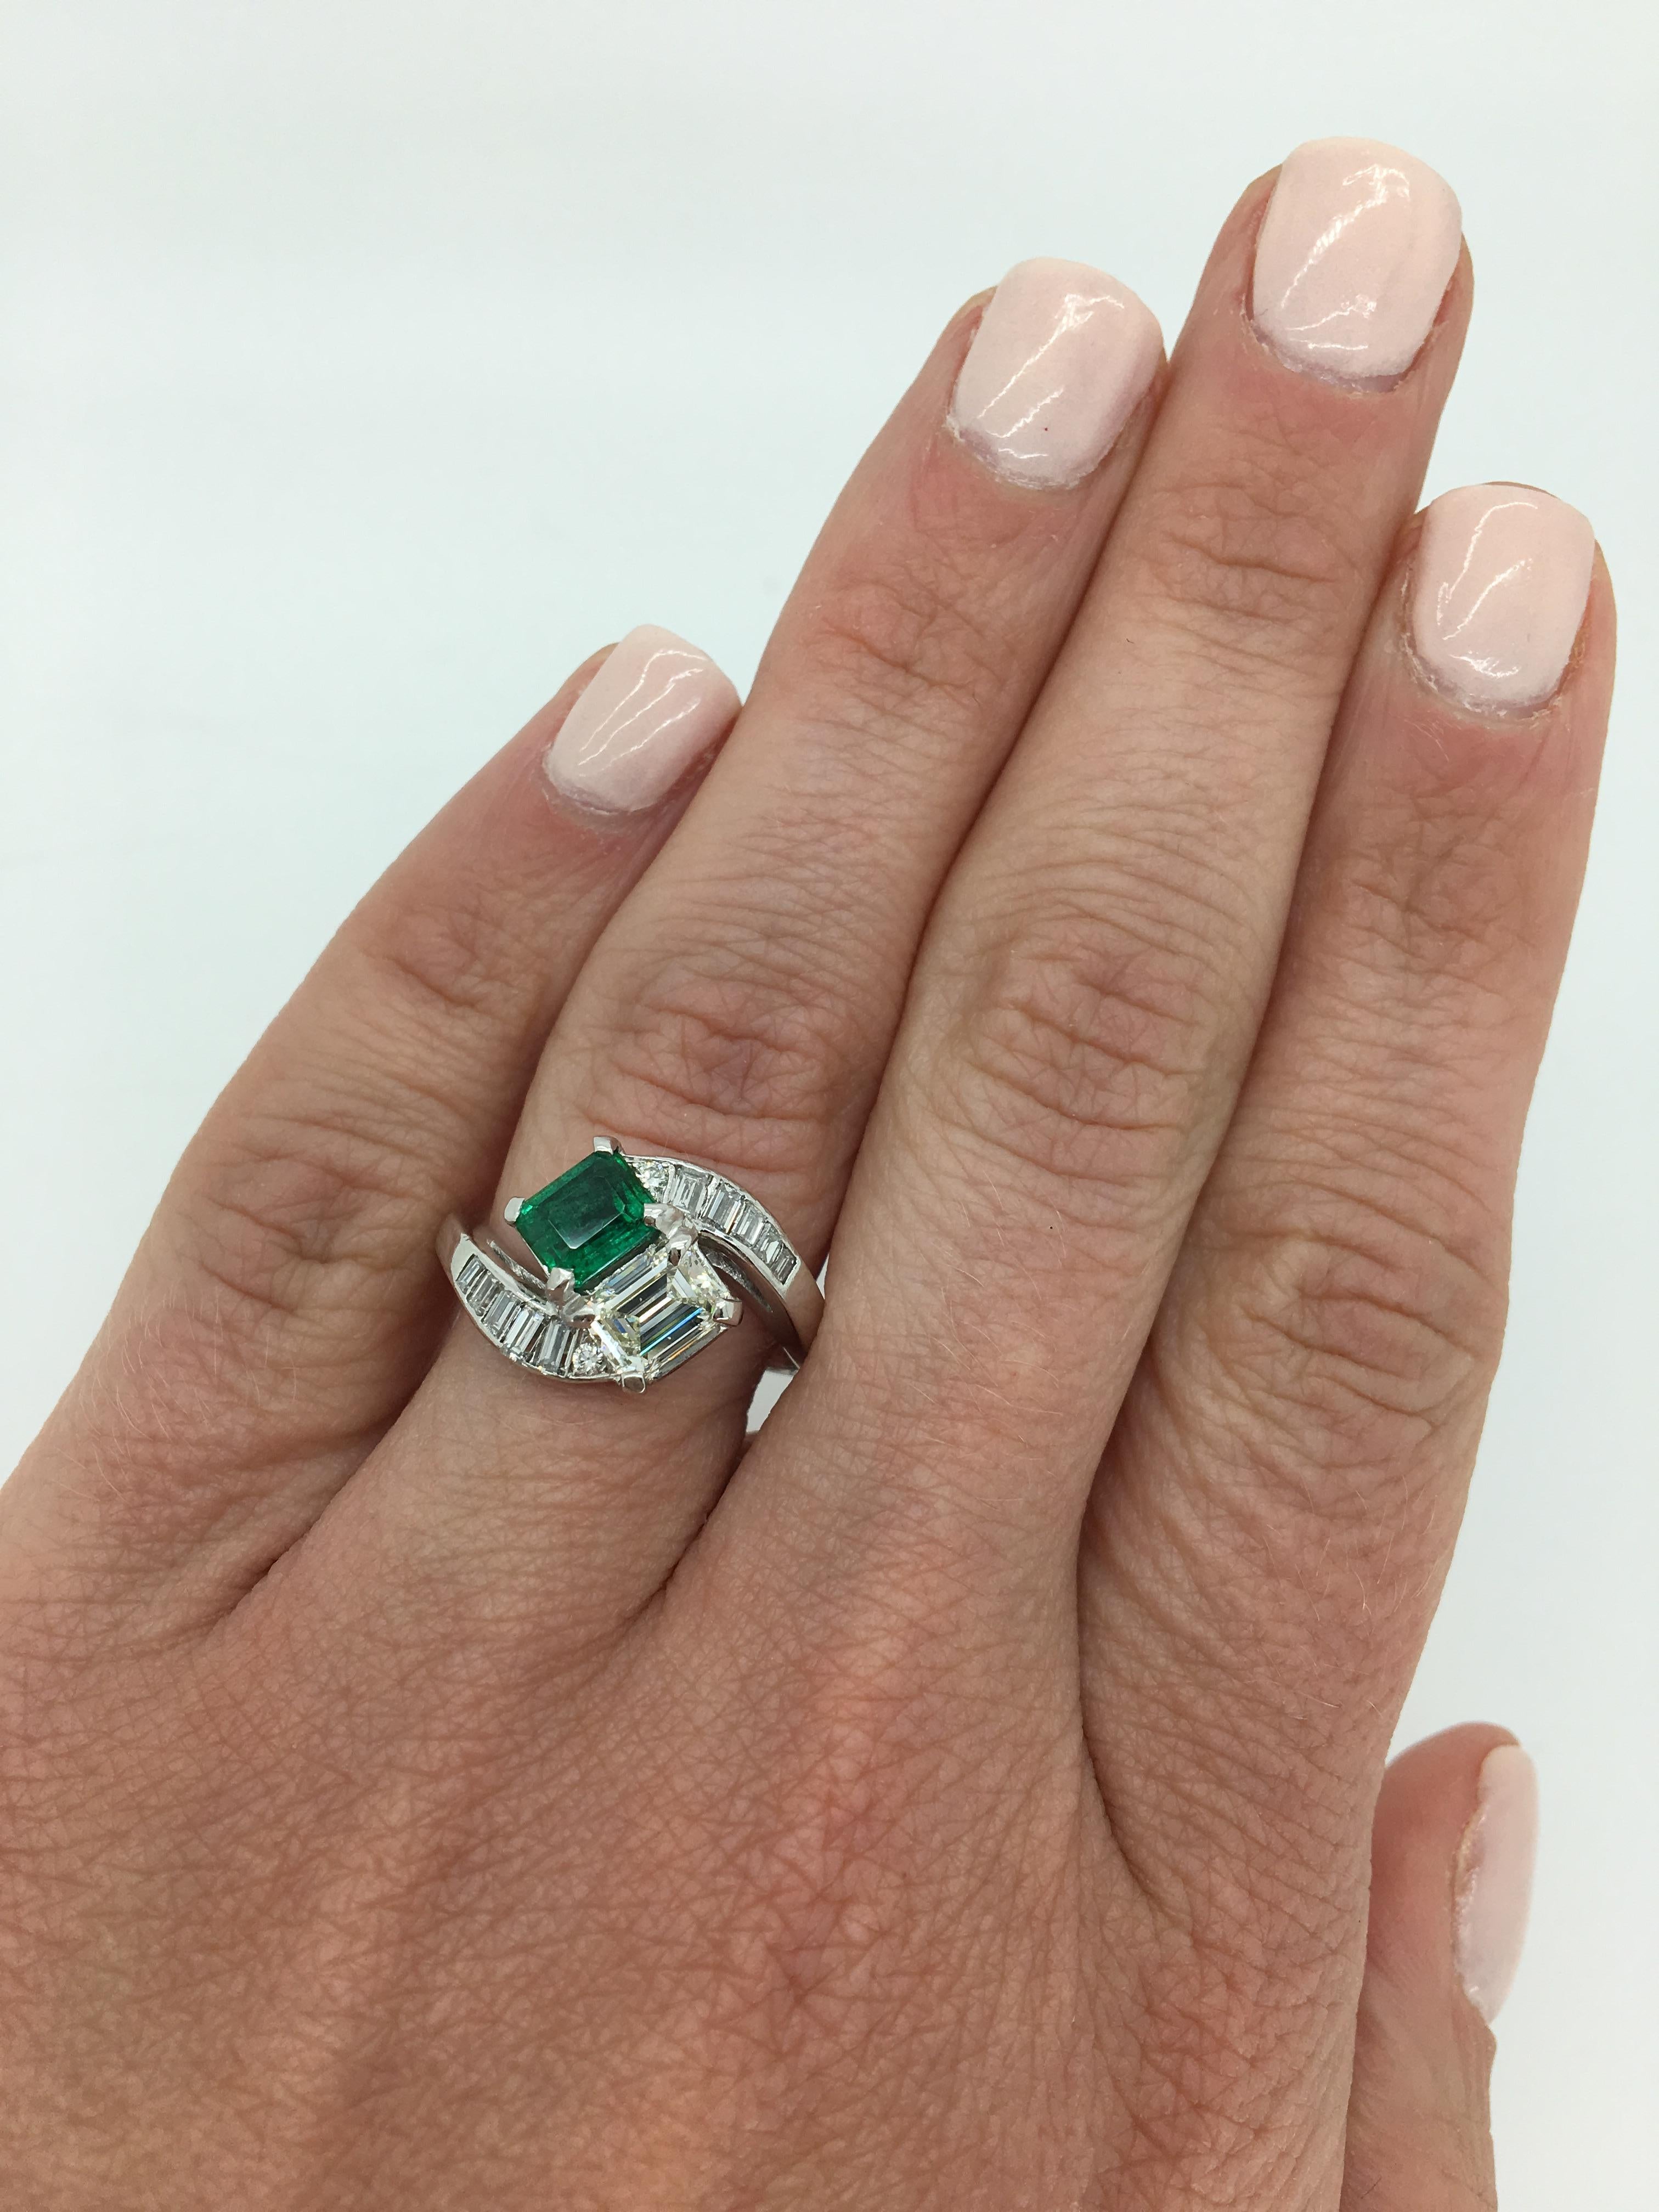 Diamond and Emerald bypass style ring crafted in platinum.

Gemstone: Diamond & Emerald
Gemstone Carat Weight: Approximately .60CT Emerald
Center Diamond Carat Weight: Approximately .70CT
Center Diamond Cut: Emerald Cut
Center Diamond Color: